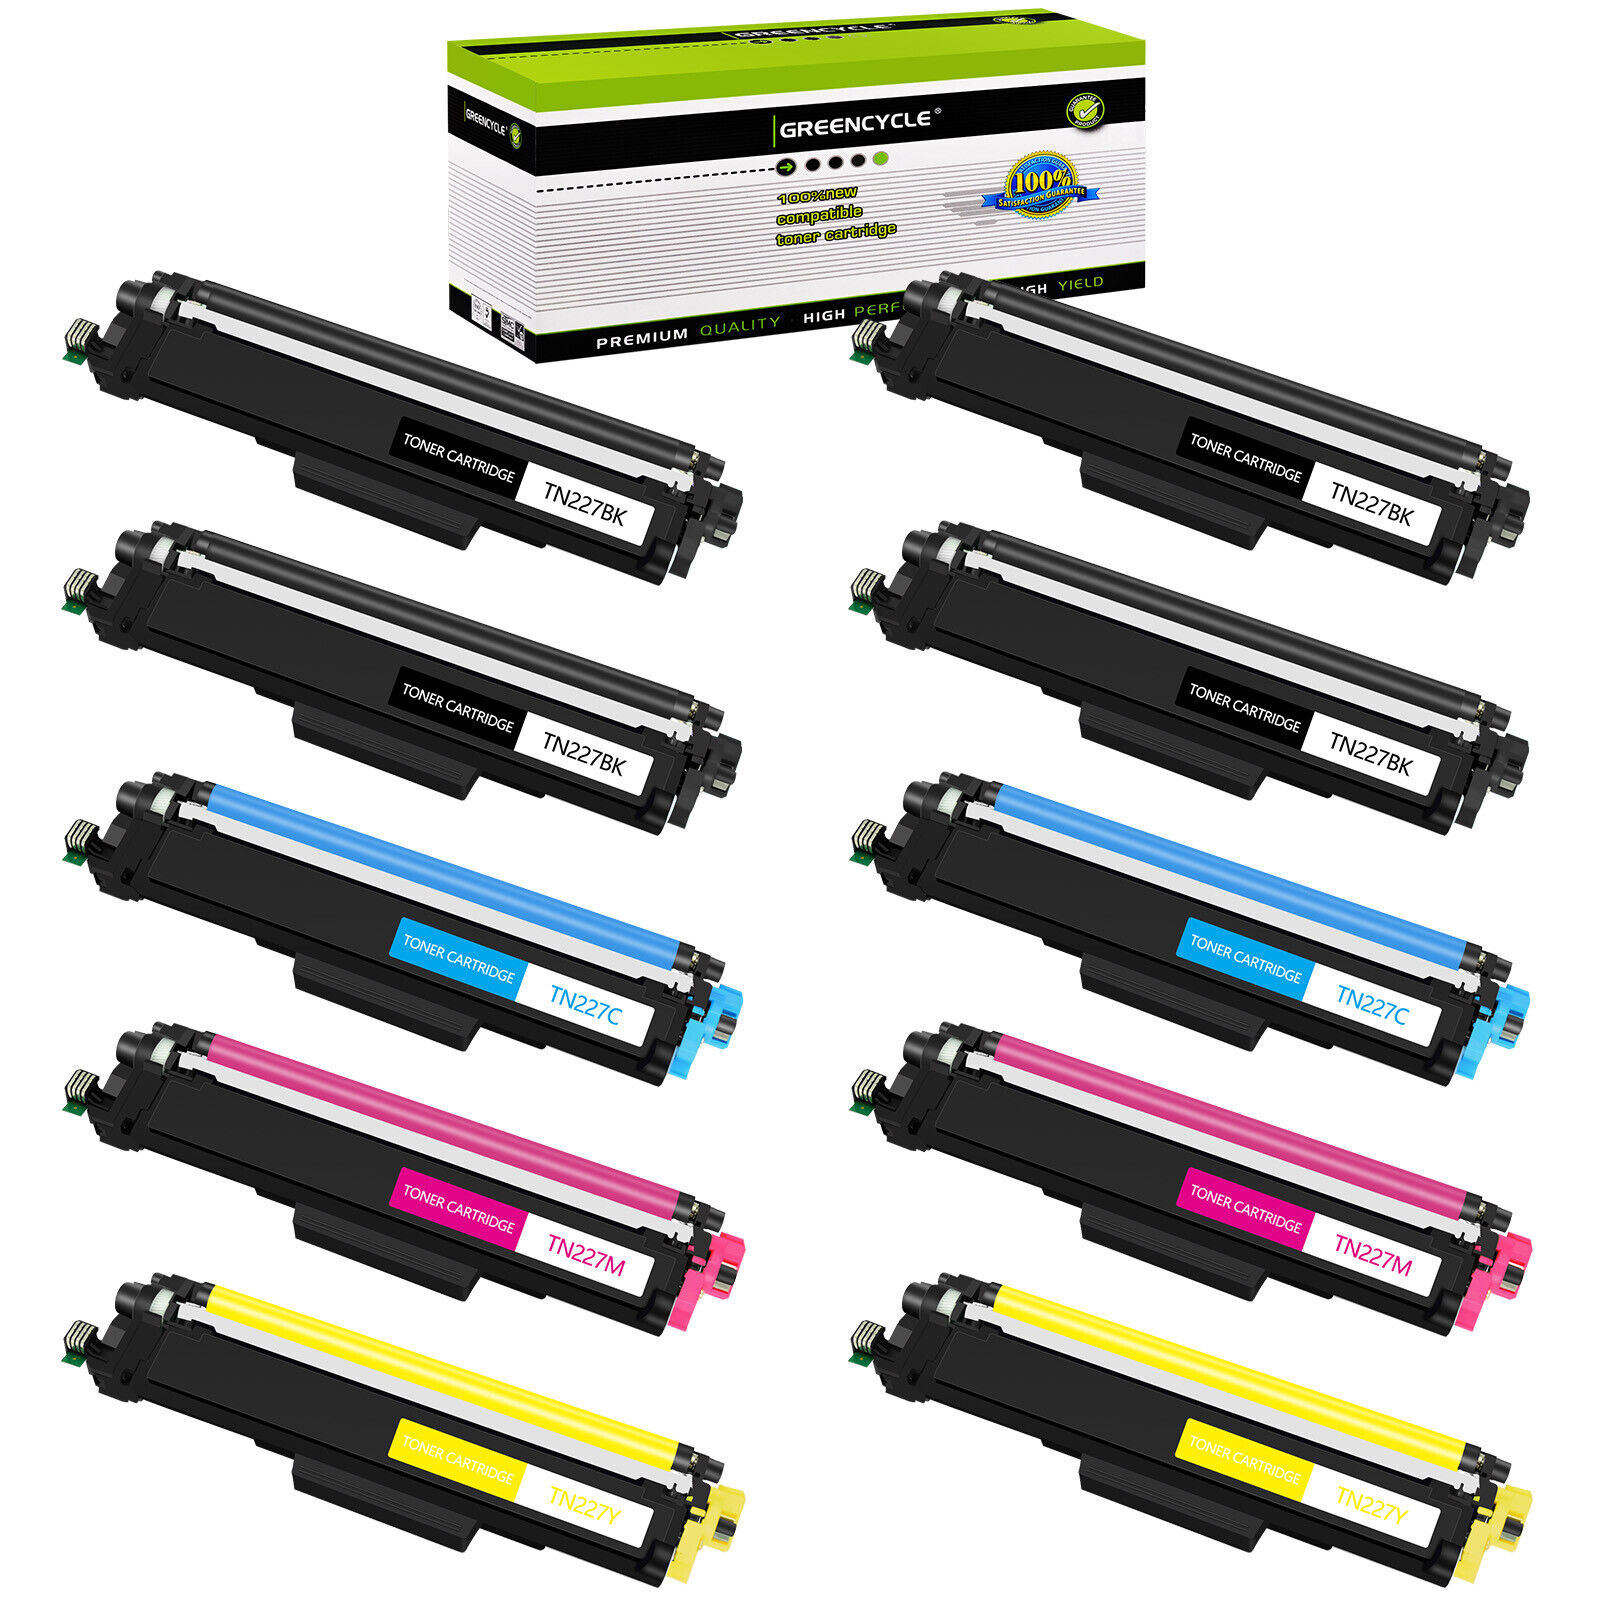 Greencycle 10PK ColorSet TN227BK CY MG YL Toner Cartridge for Brother HL-L3210CW